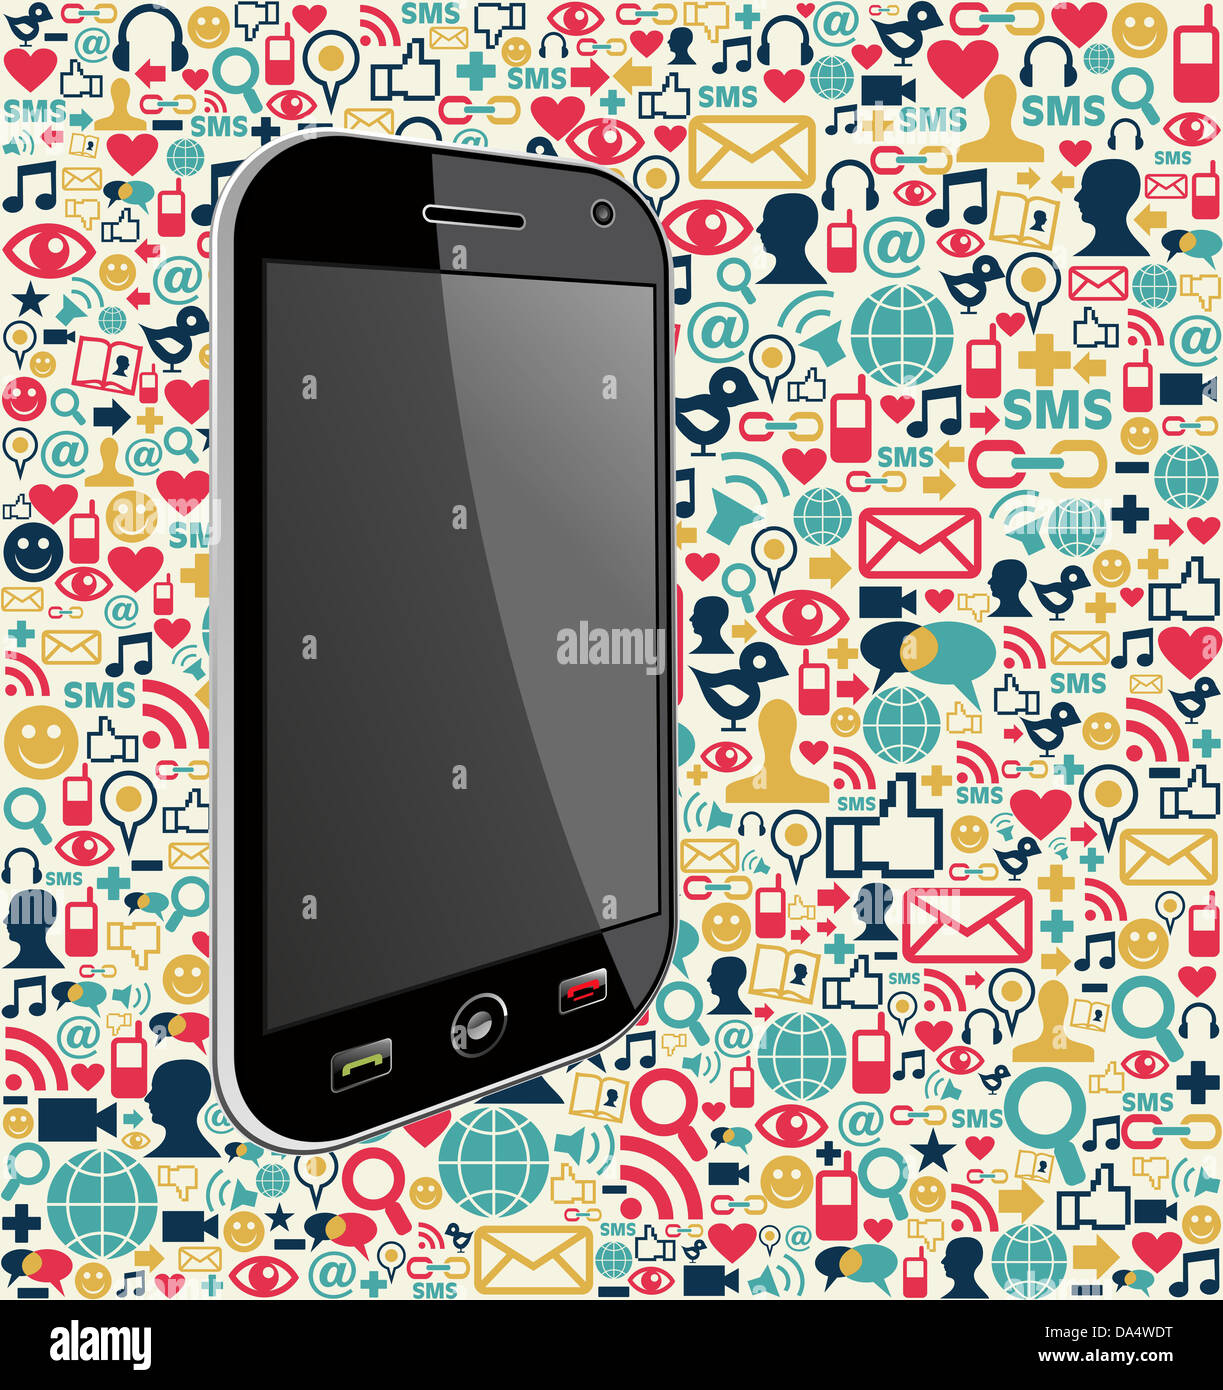 Smart phone generic on color icons background. Vector file layered for easy manipulation and customisation. Stock Photo